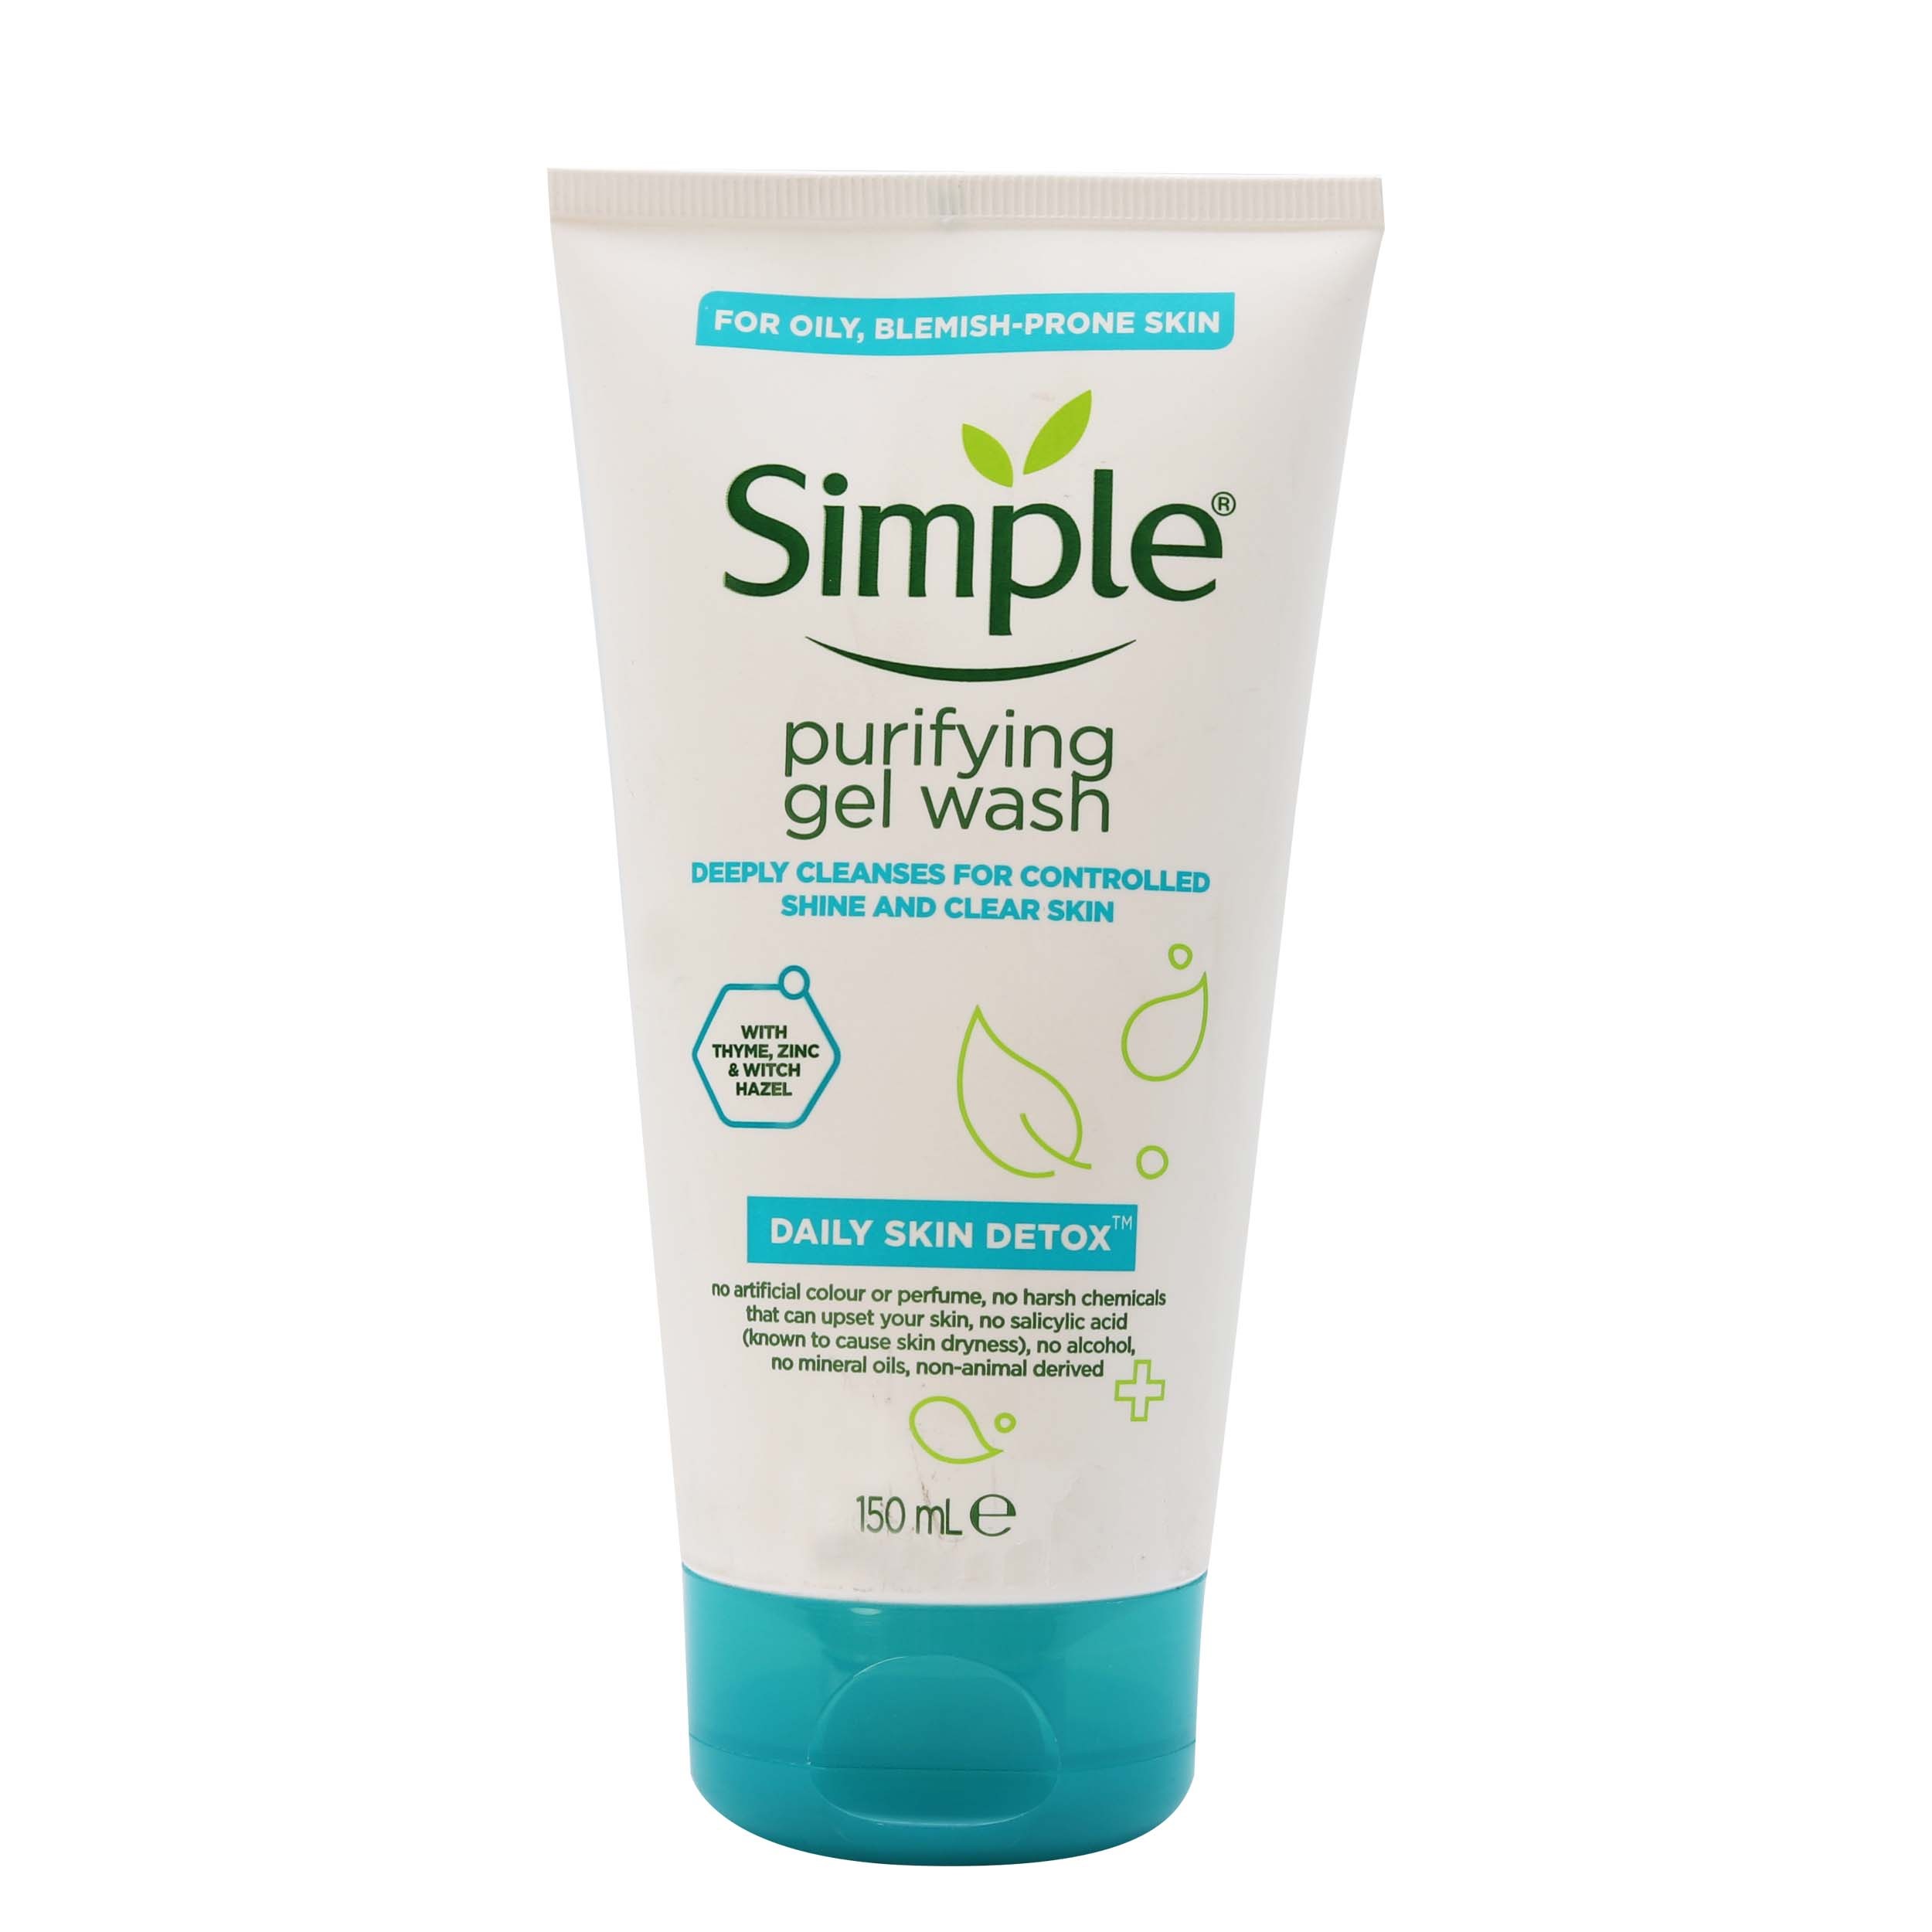 Simple face wash gel suitable for oily skin